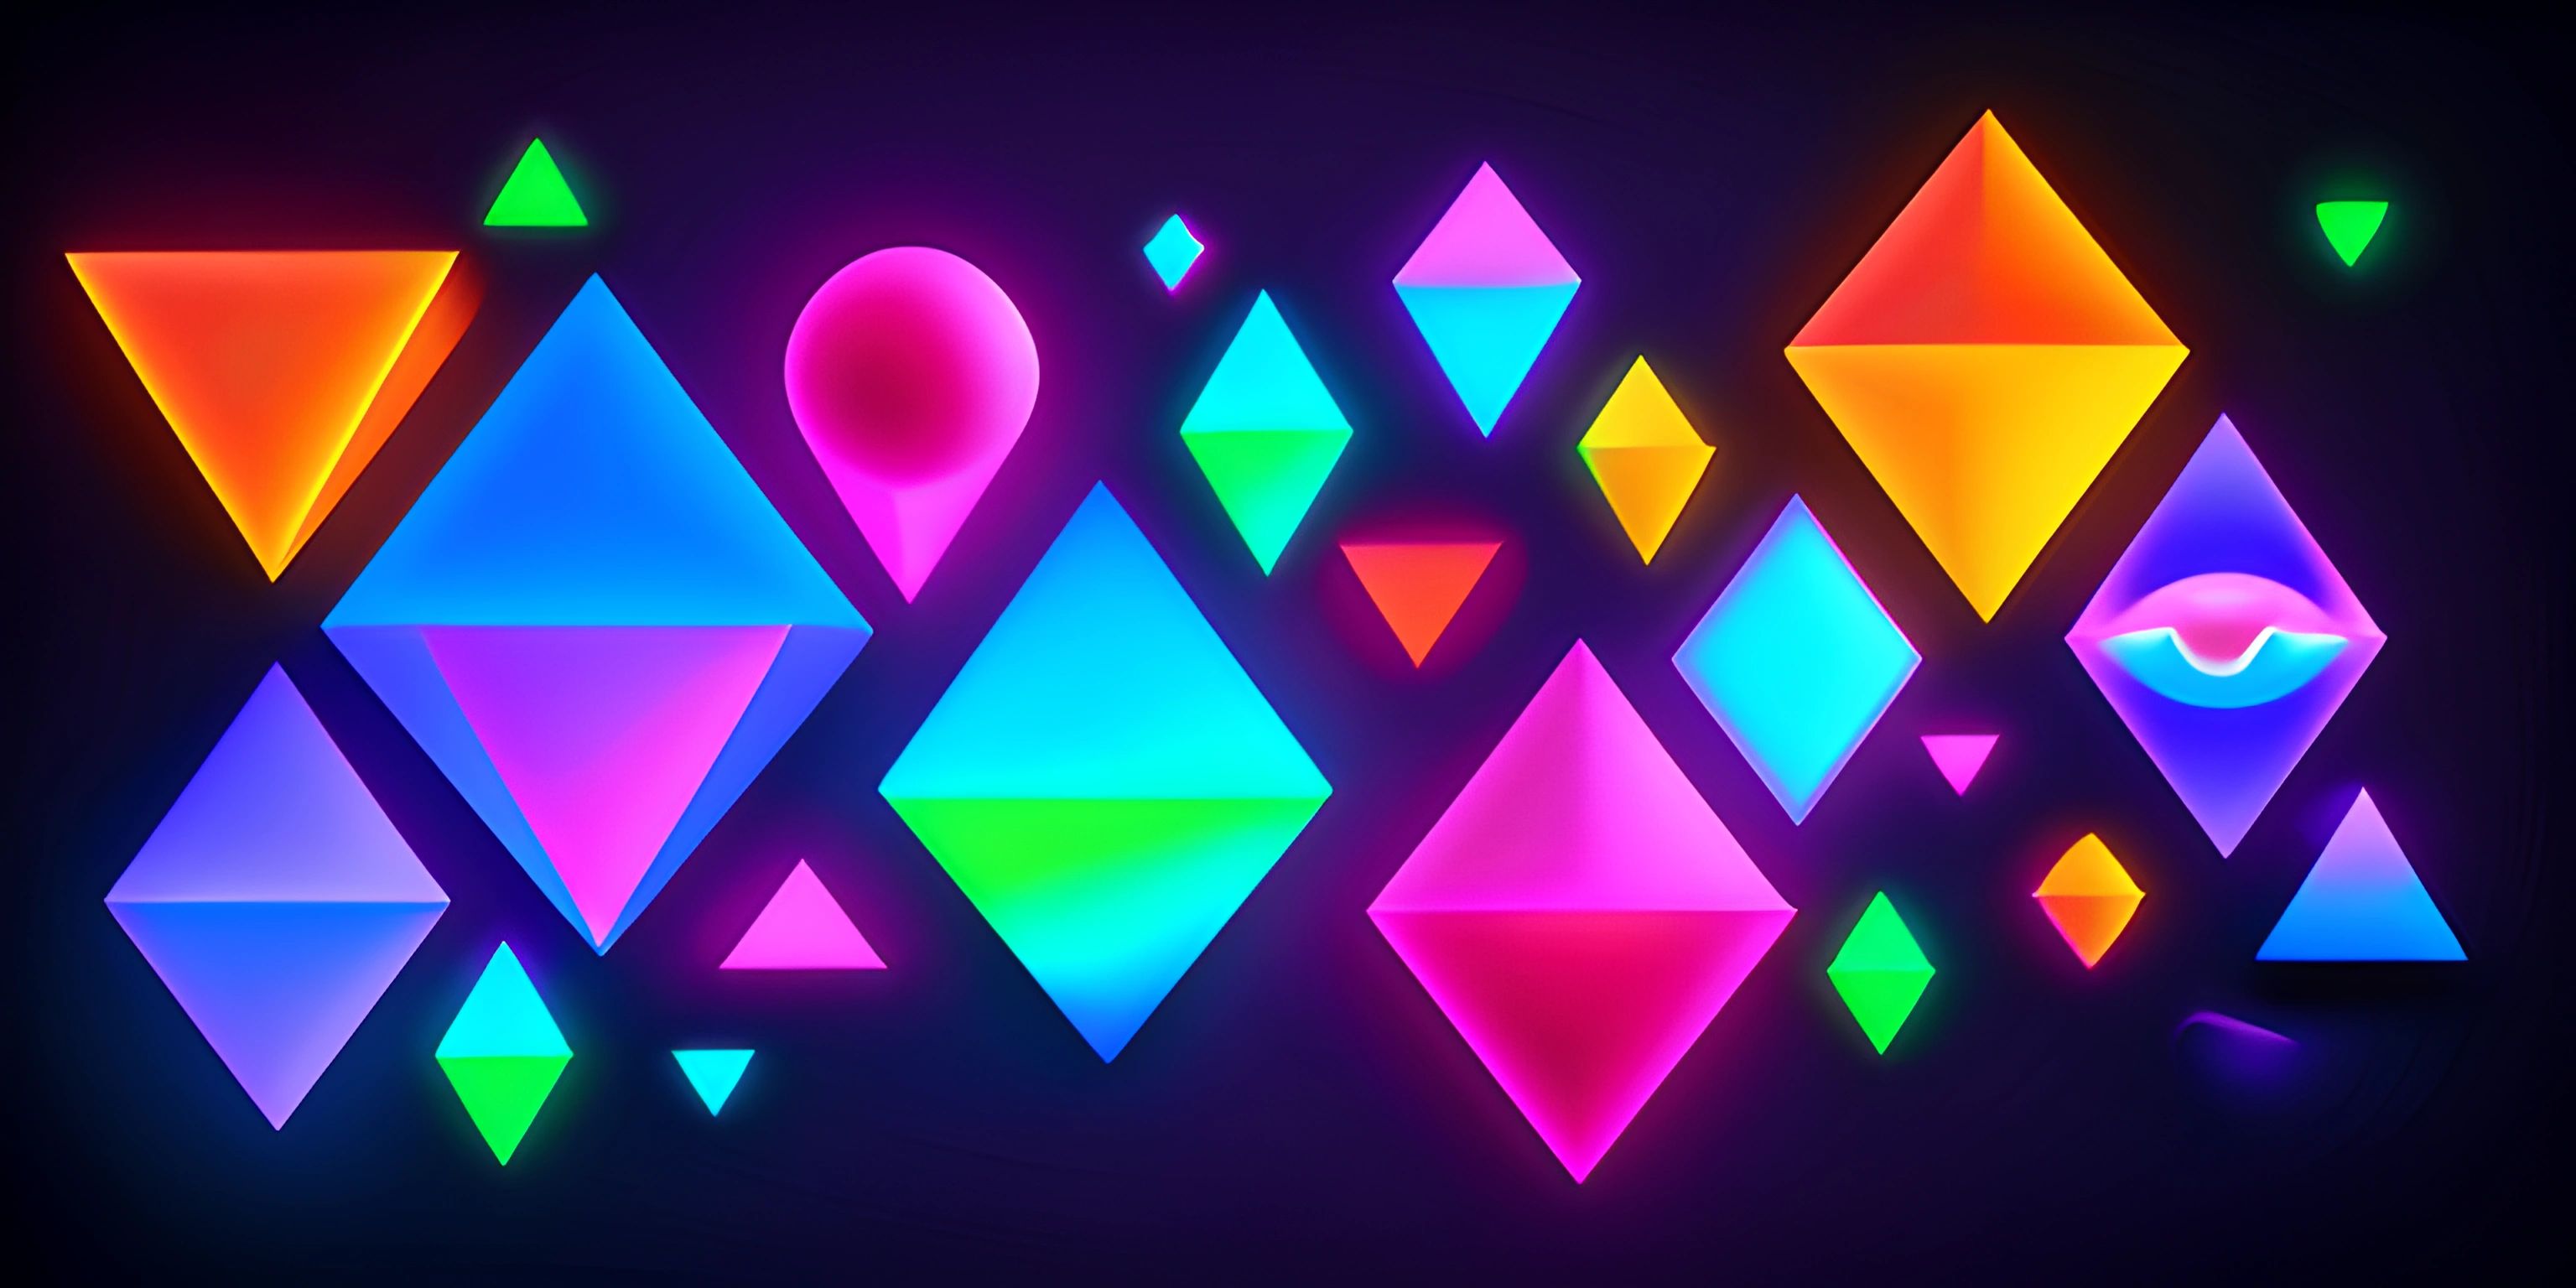 some lights are all over the geometrics in this picture and each has a different color